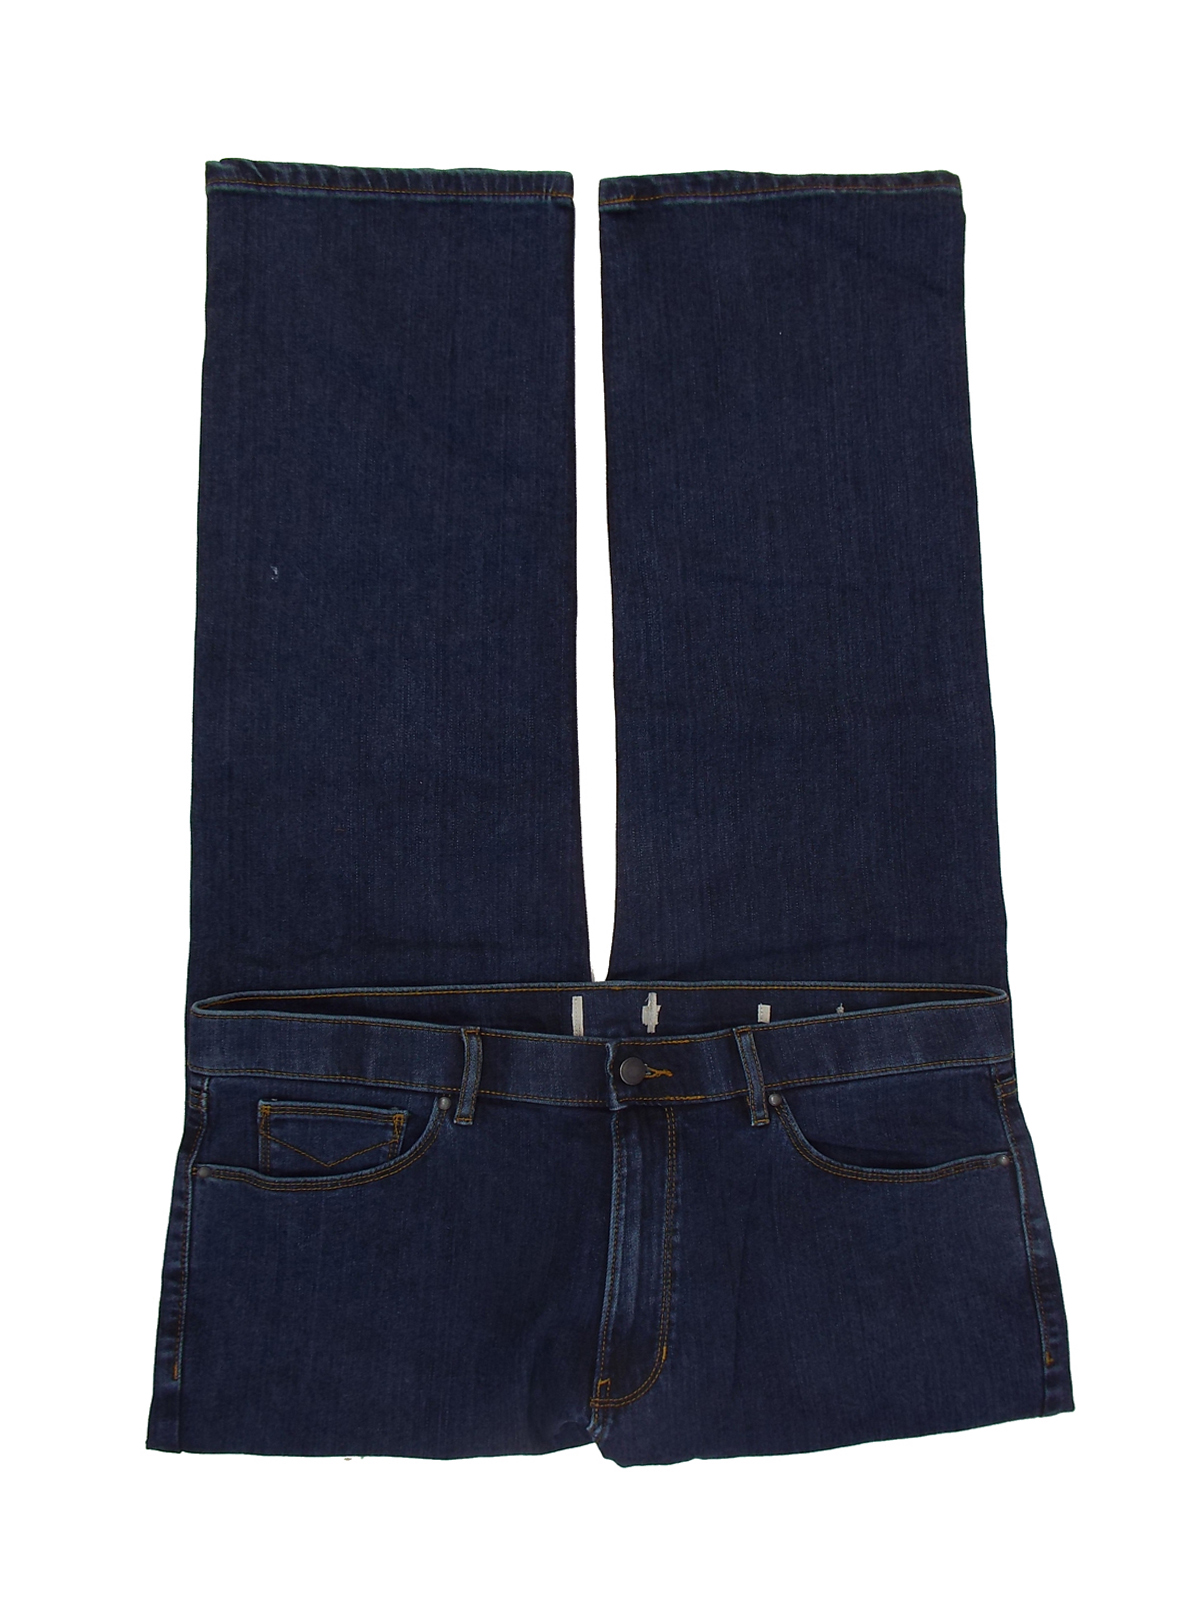 Marks and Spencer - - M&5 ASSORTED Mens Jeans - Waist Size 34 to 36 ...